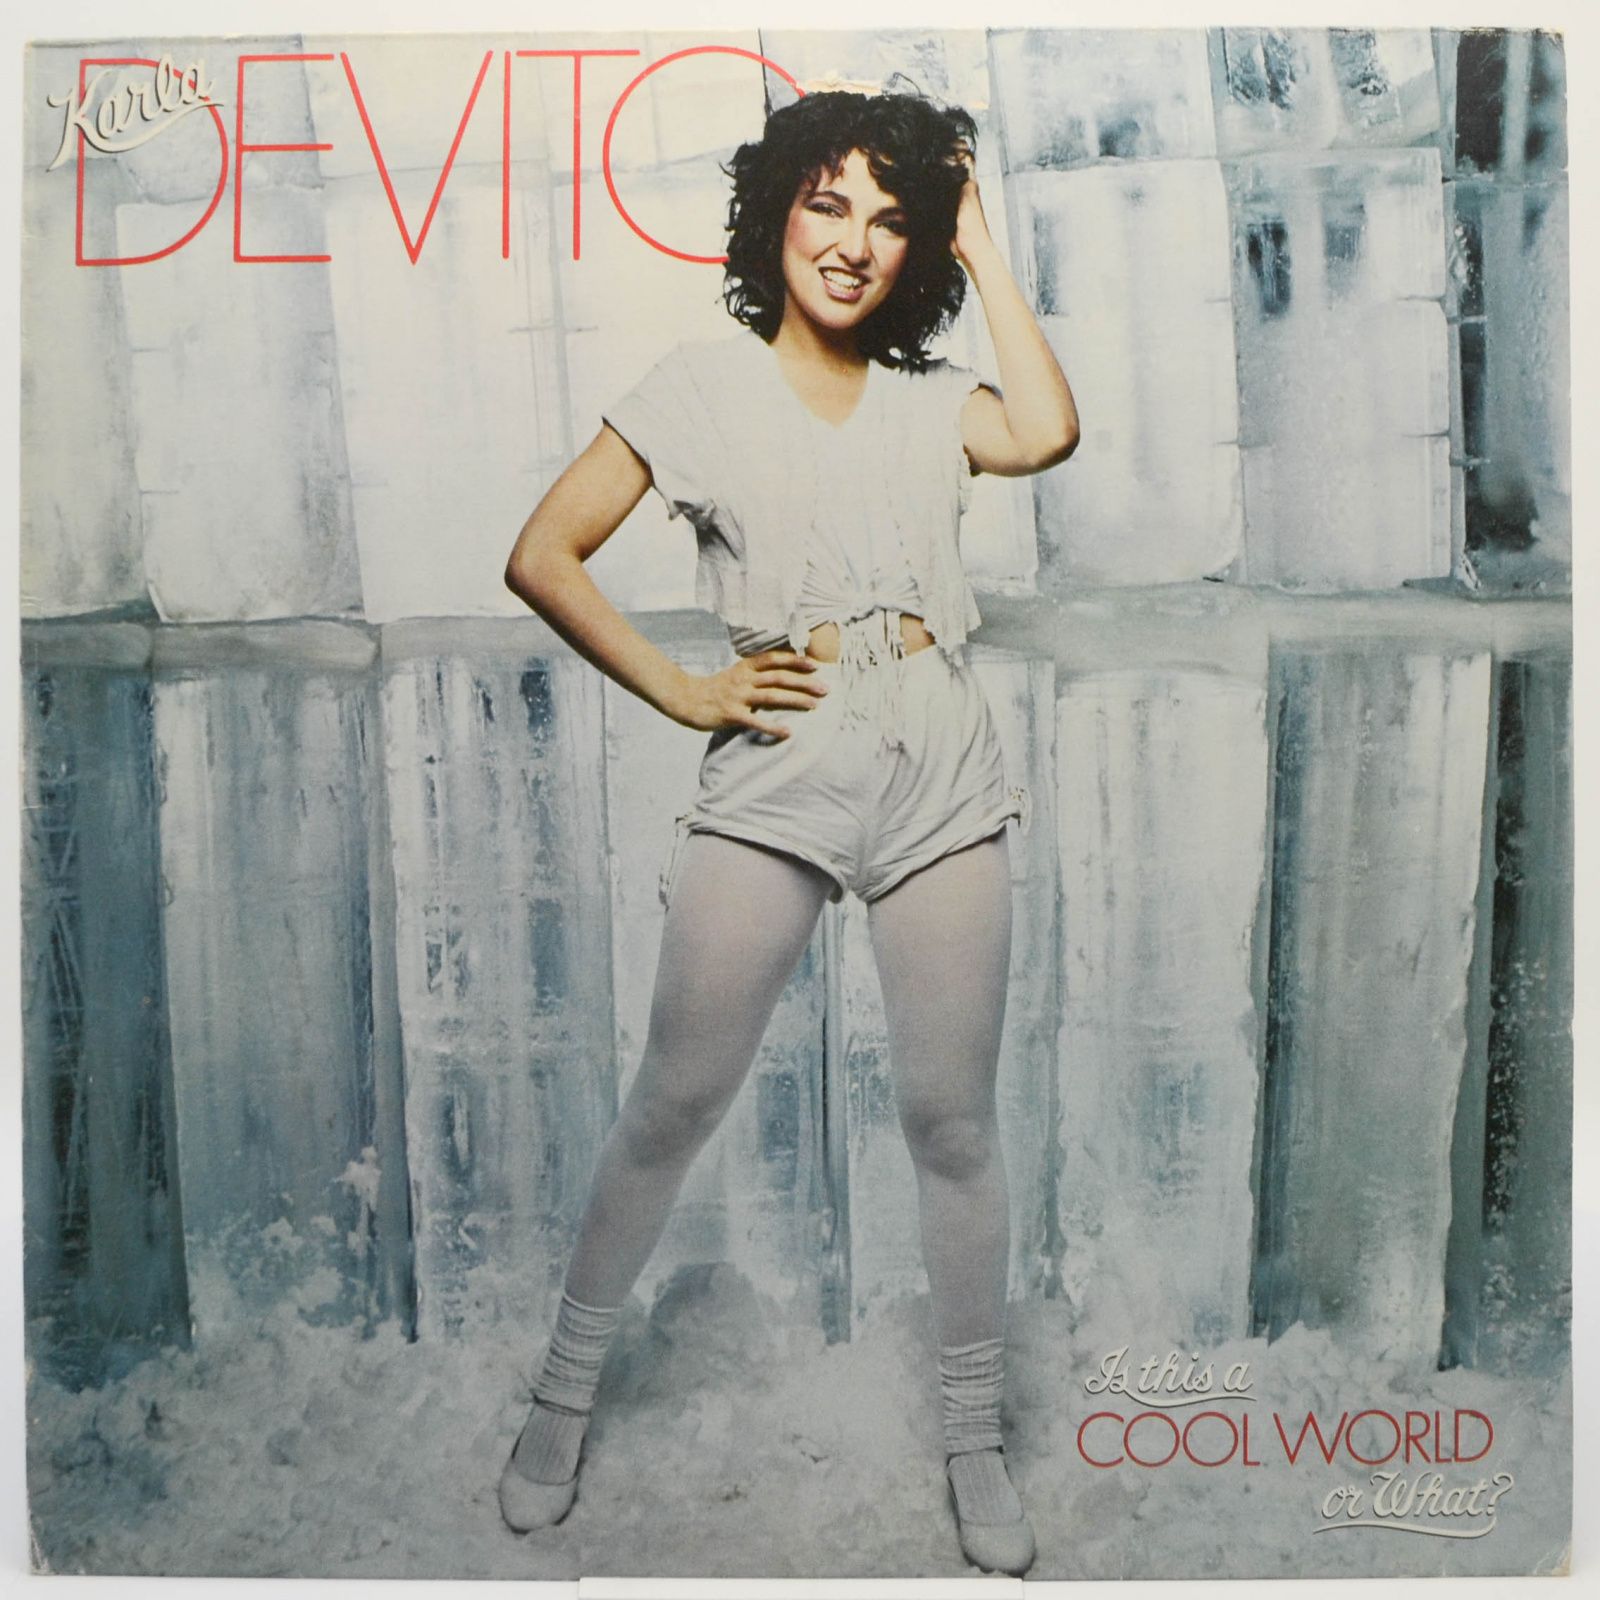 Karla DeVito — Is This A Cool World Or What?, 1981